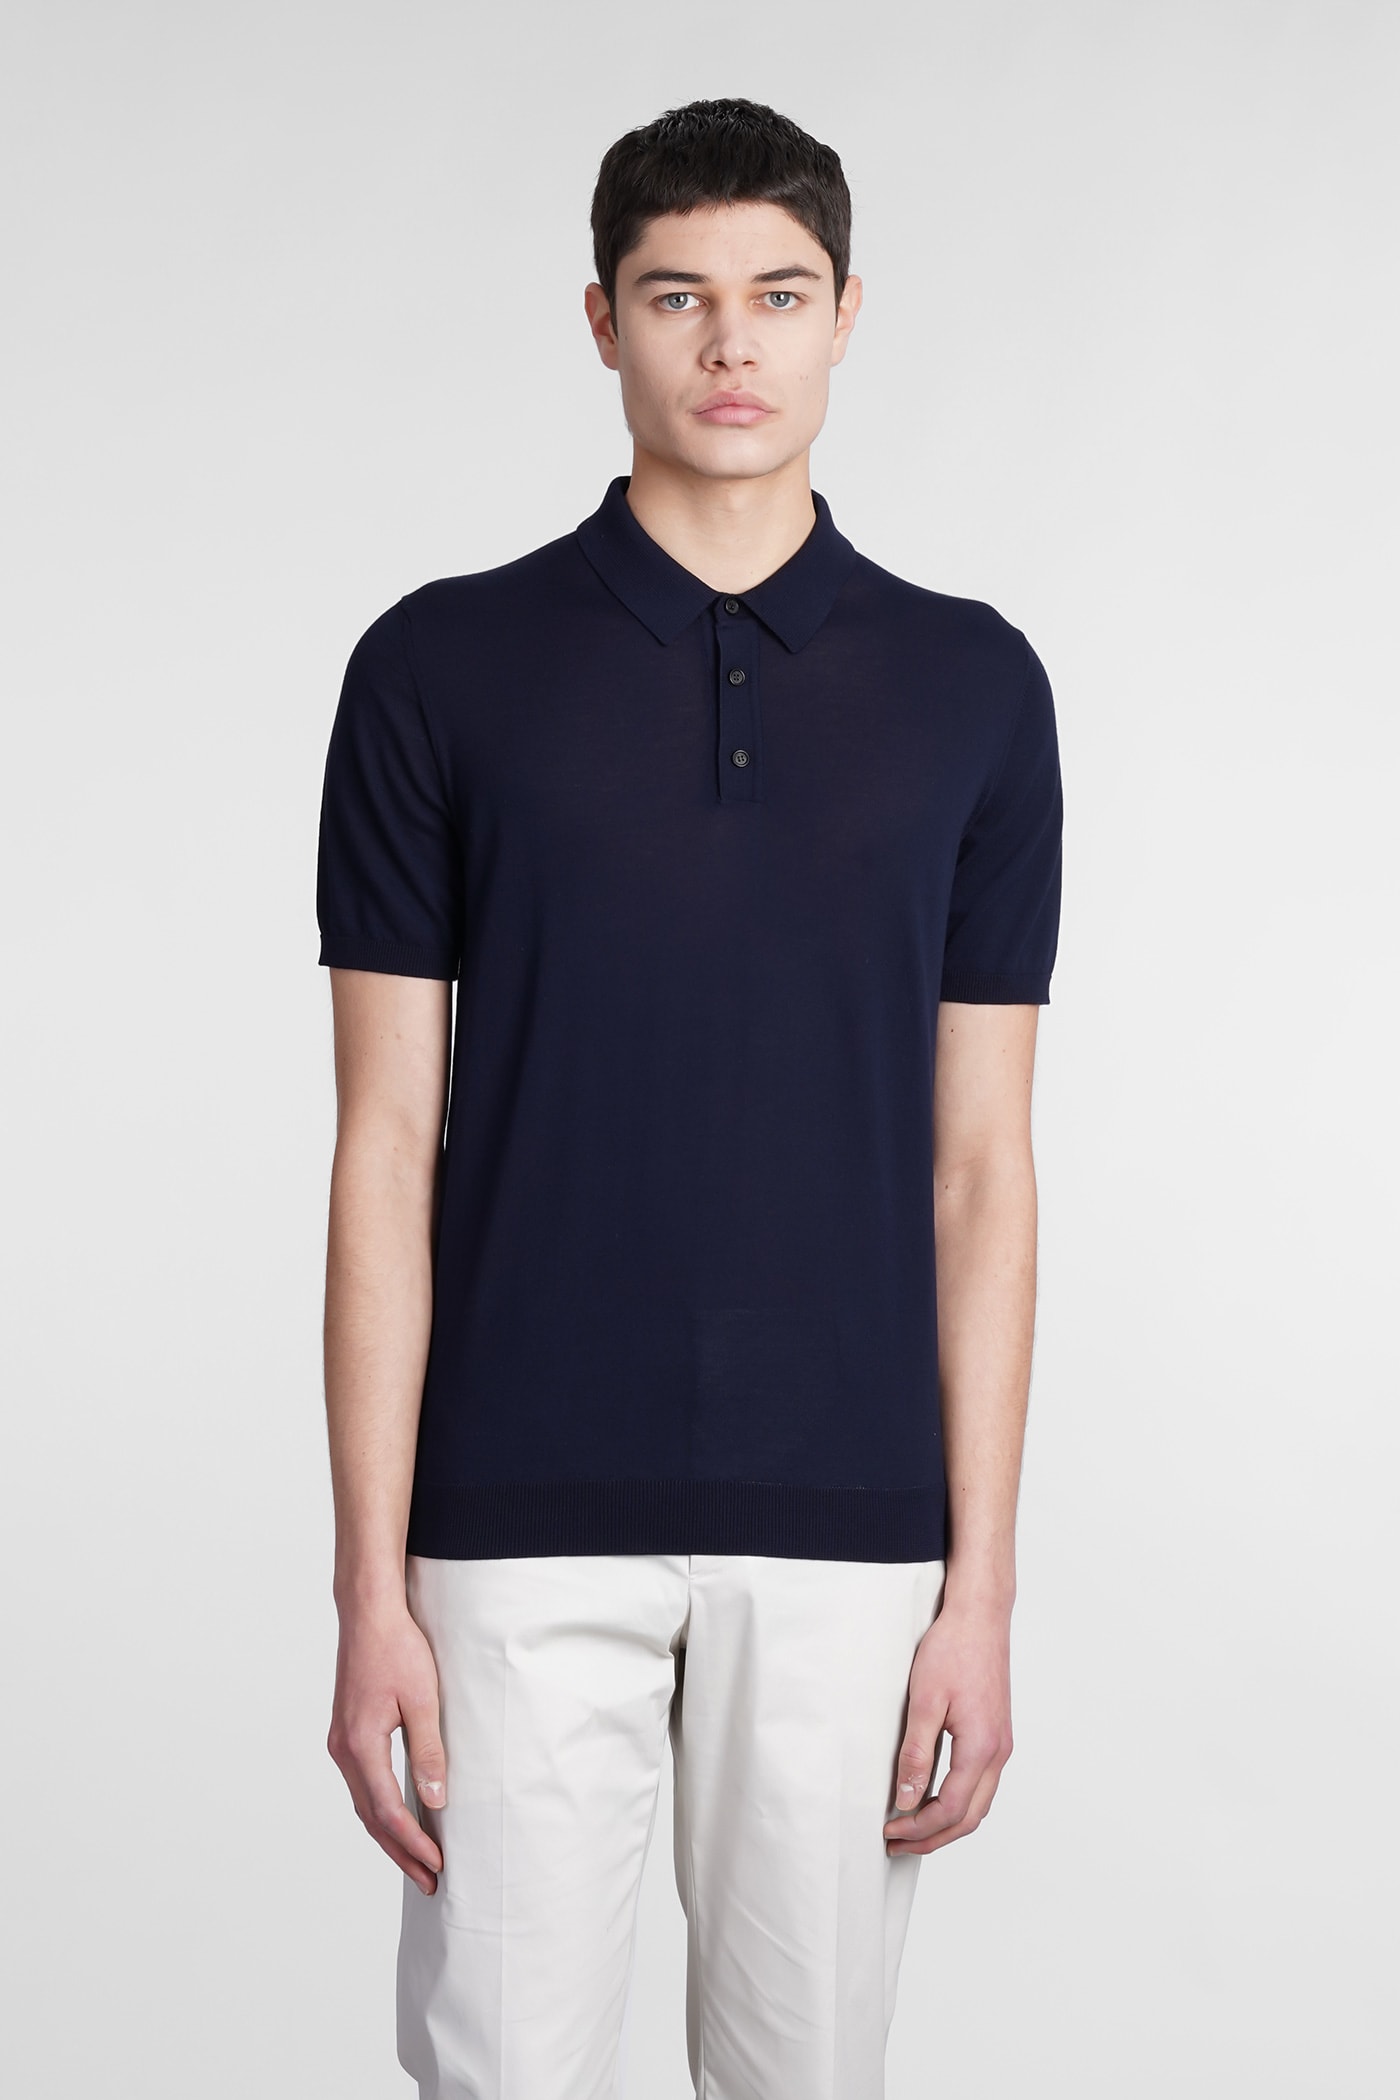 dressing gownRTO COLLINA POLO IN BLUE COTTON